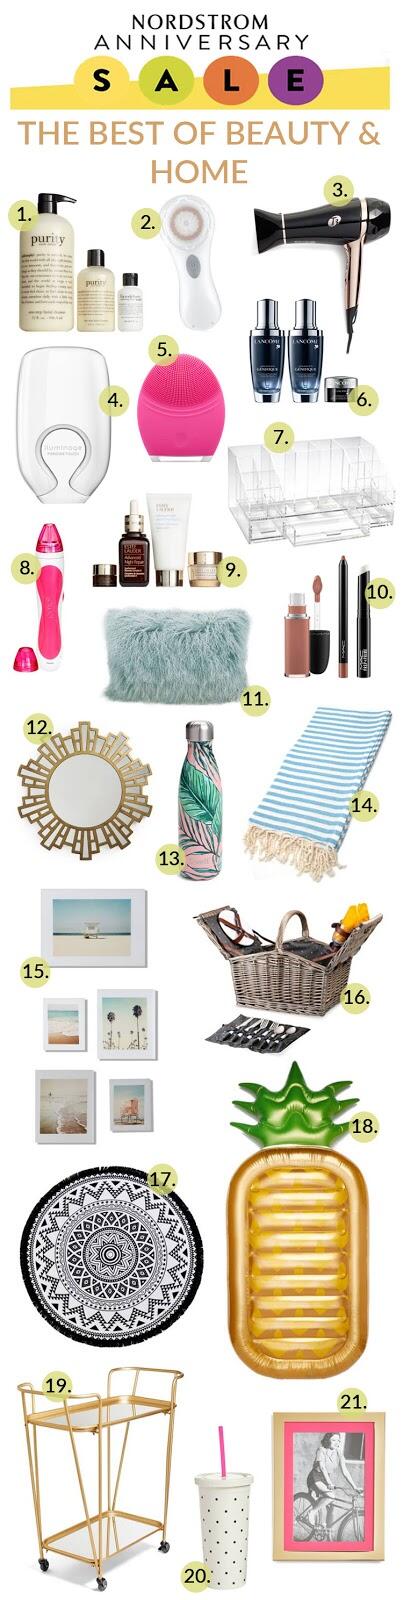 The Best of Nordstrom Home & Beauty Sale Picks by popular blogger Laura of Walking in Memphis in High Heels